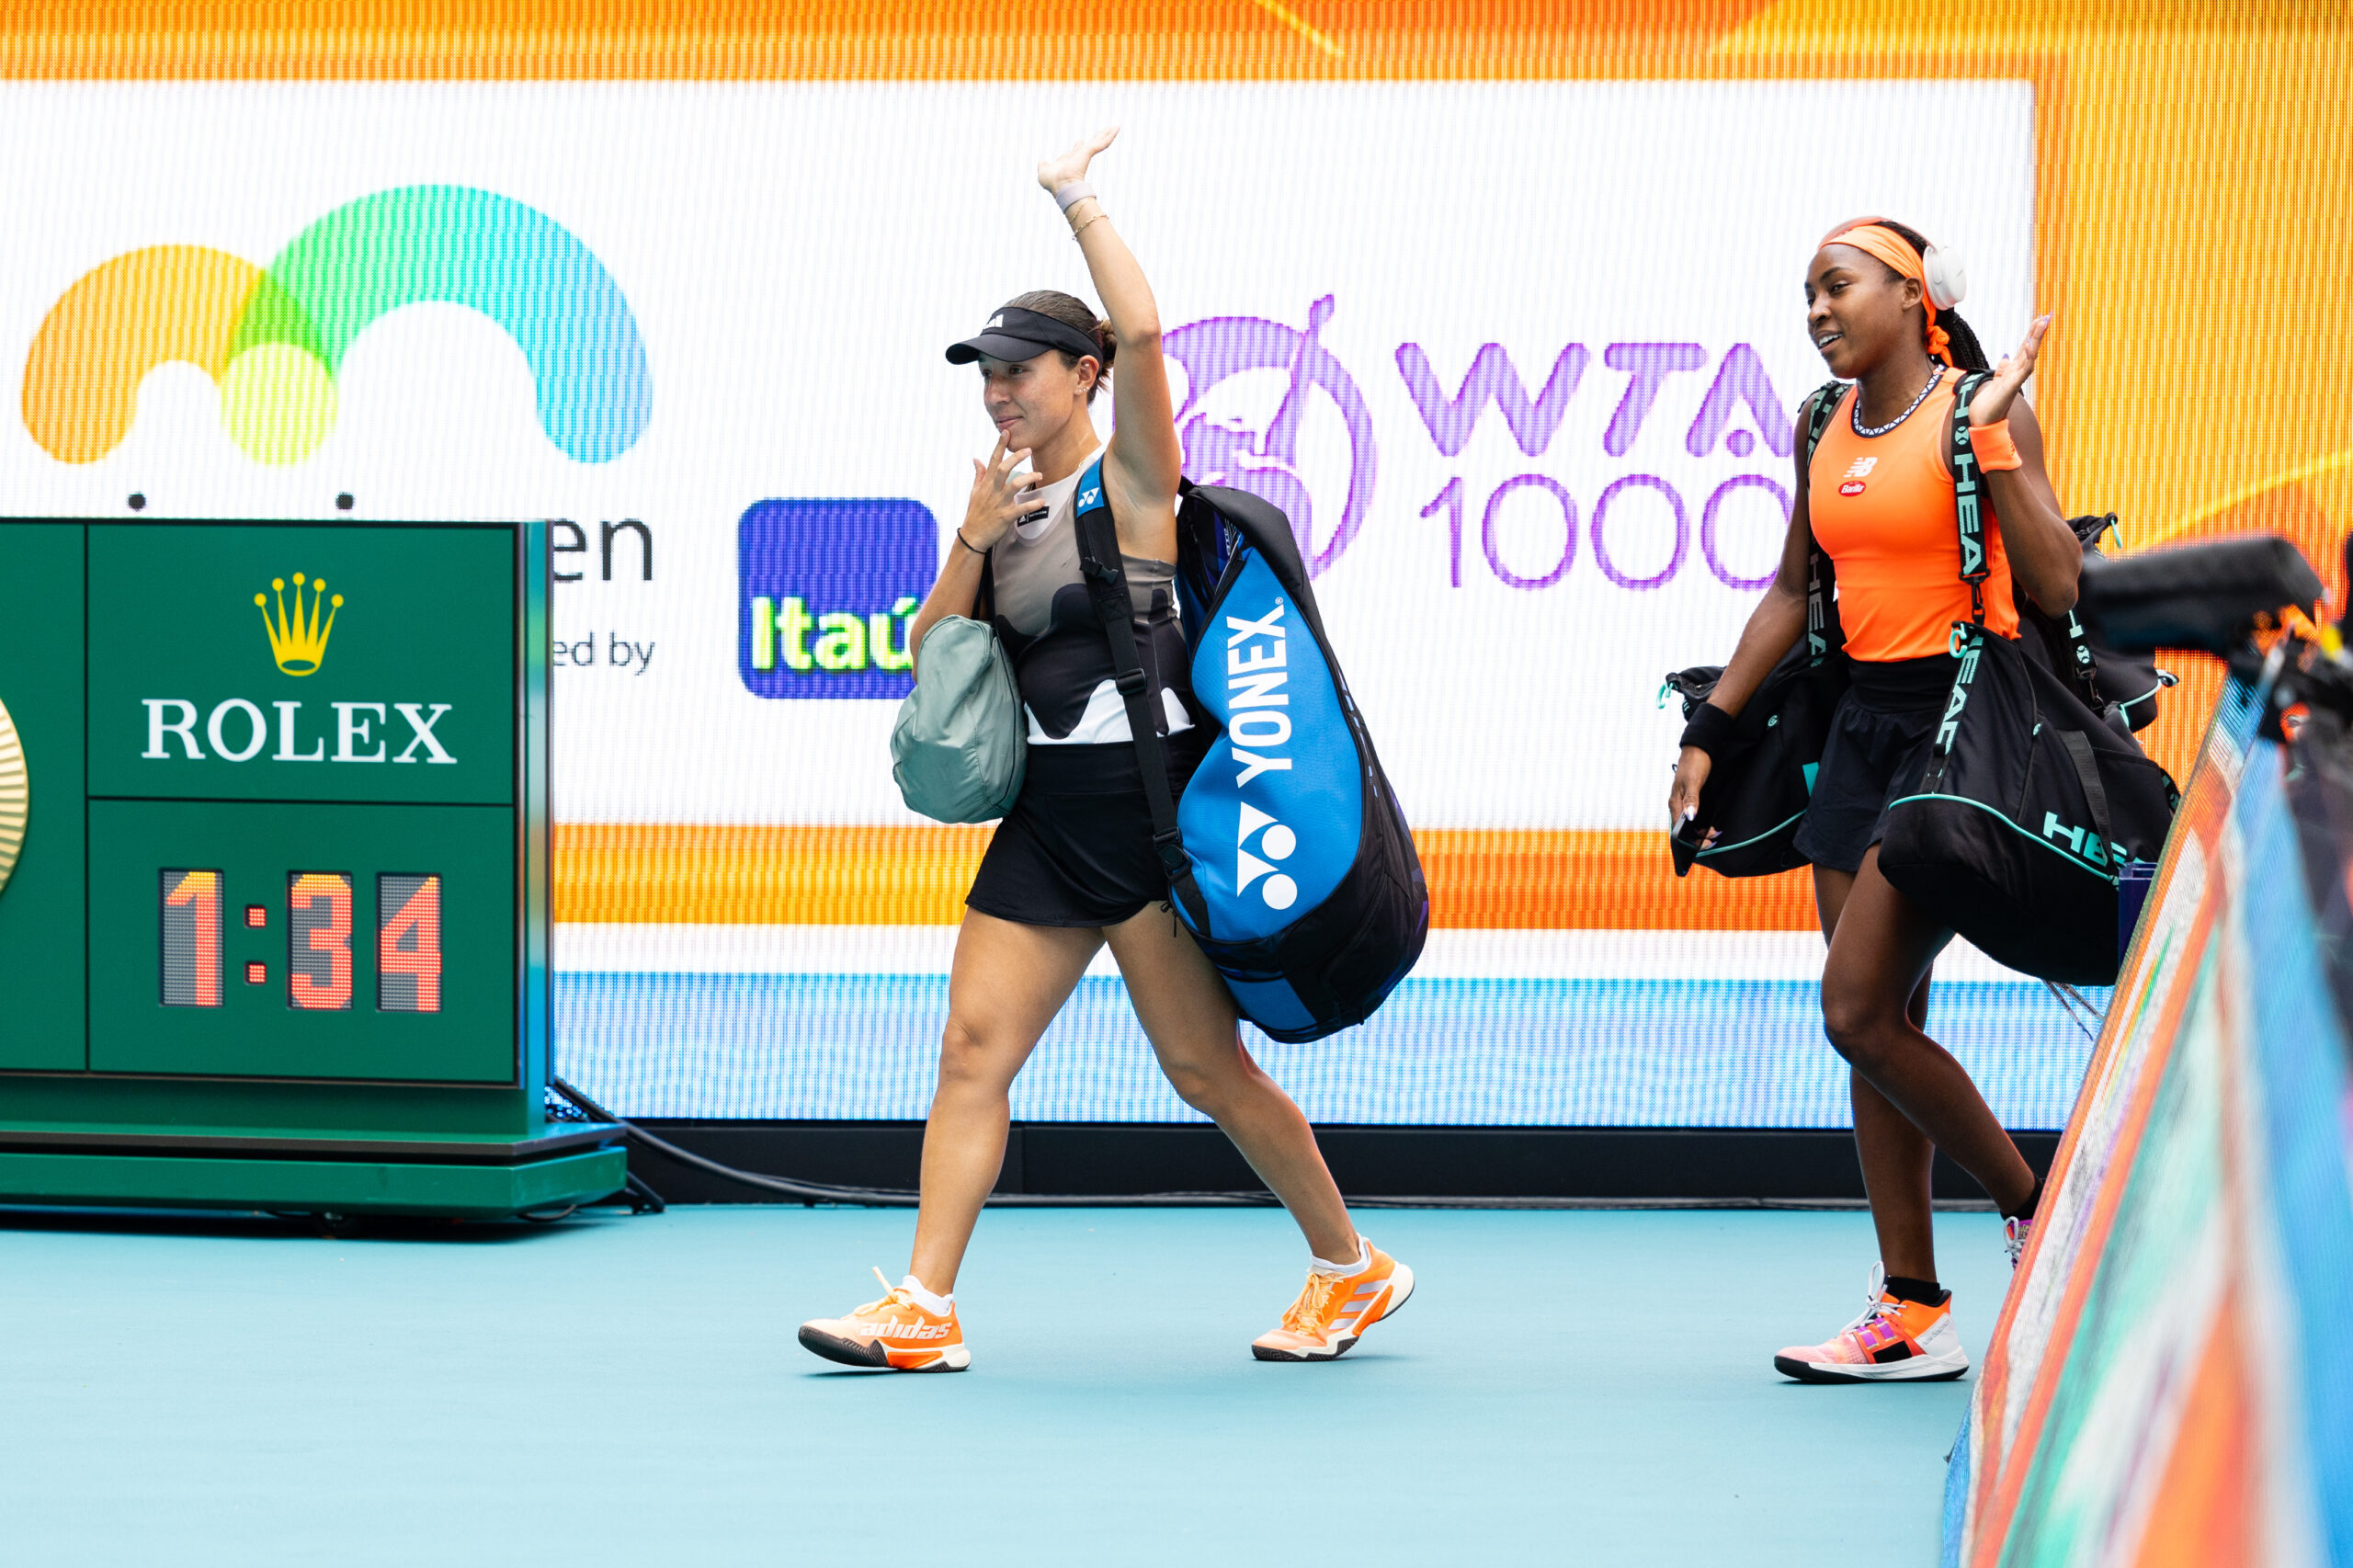 Jessica Pegula and Coco Gauff entering the stadium at Hard Rock Stadium for the 2023 Women's Doubles Championship match on April 2, 2023.